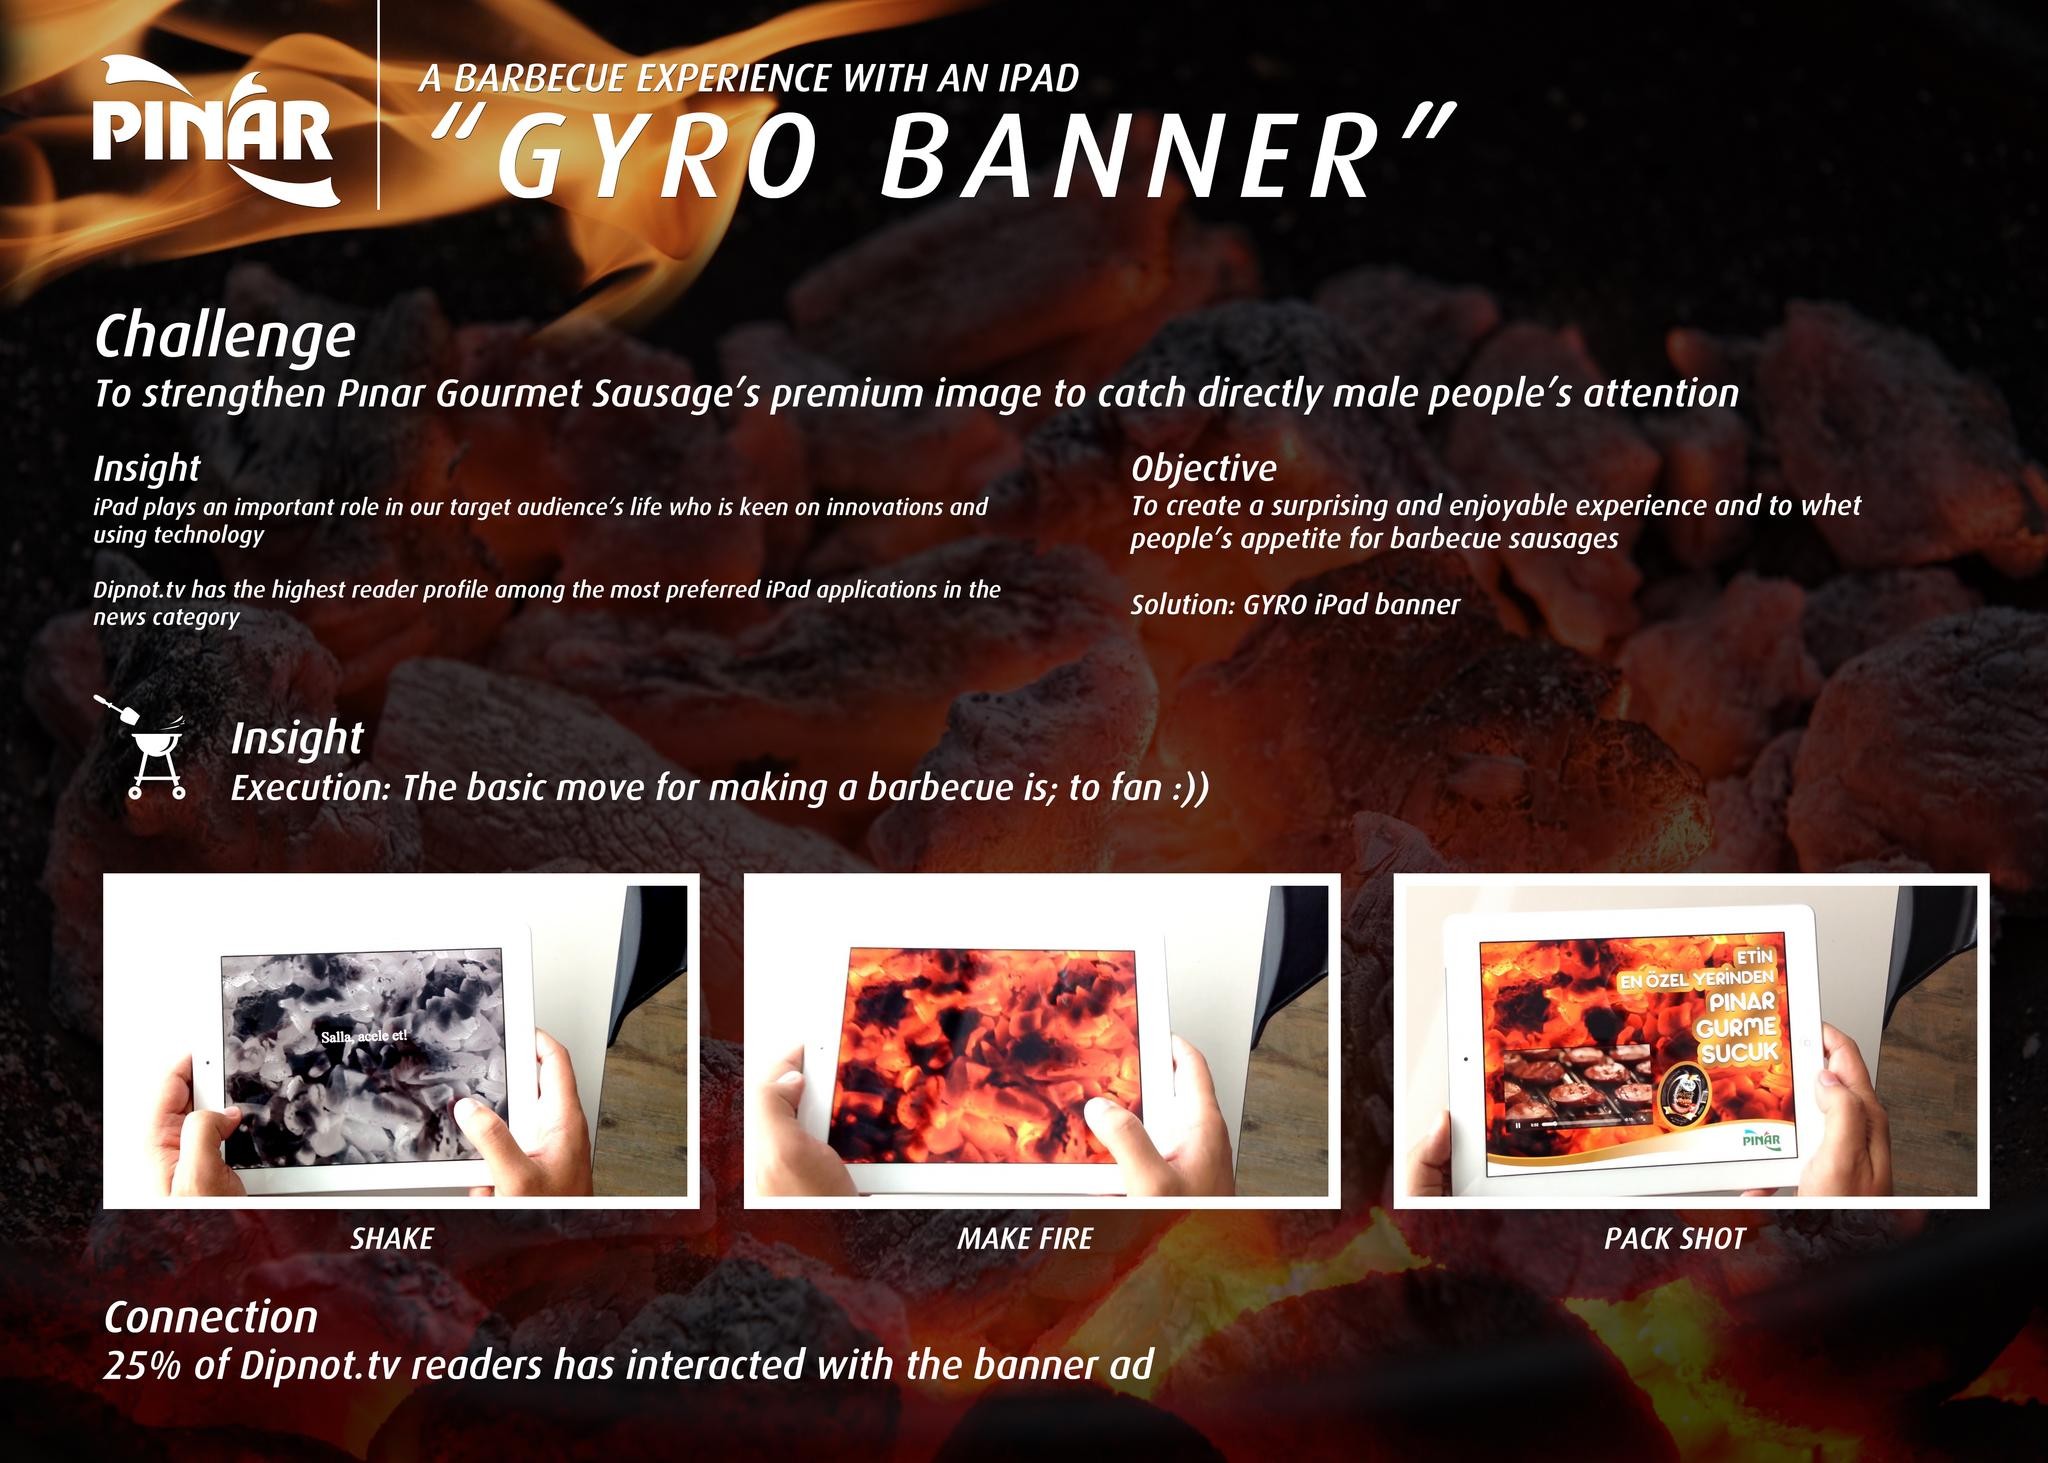 A BARBECUE EXPERIENCE WITH AN IPAD: GYRO BANNER